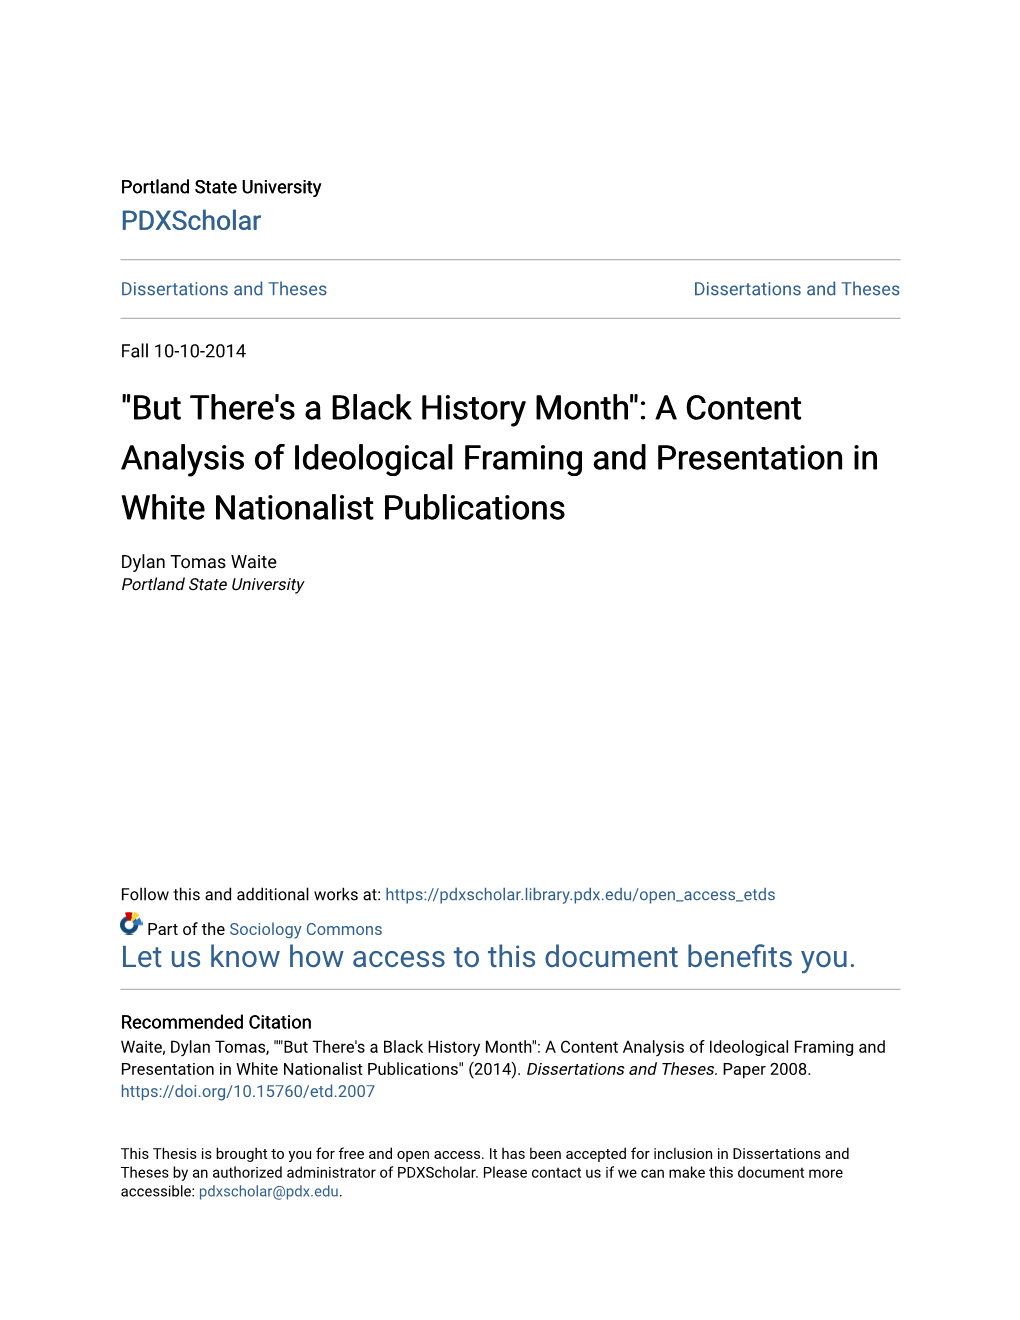 "But There's a Black History Month": a Content Analysis of Ideological Framing and Presentation in White Nationalist Publications